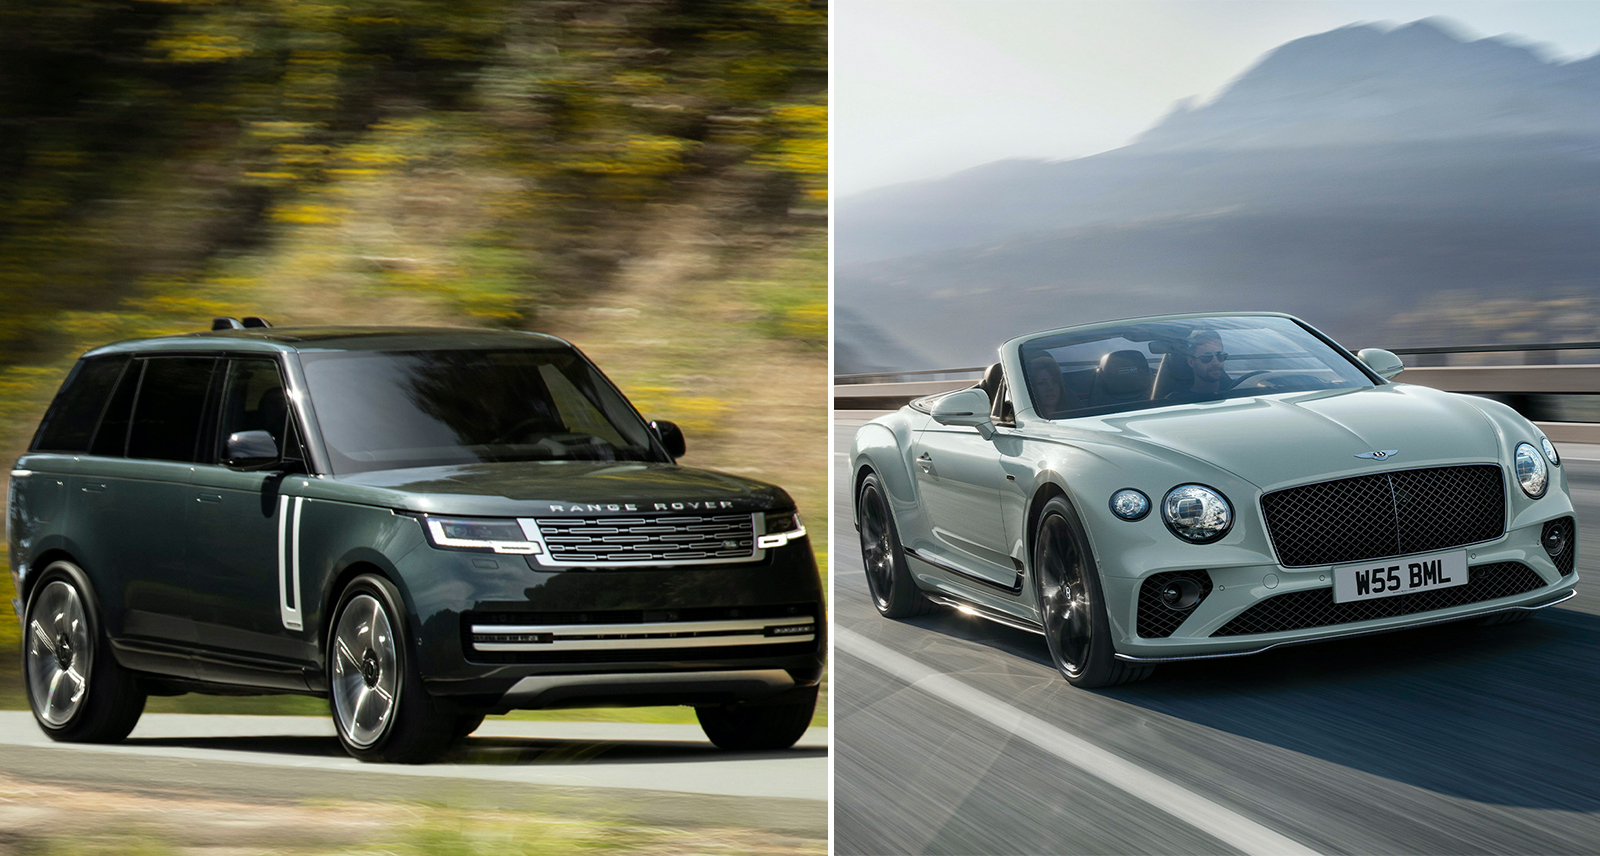 On left, Range Rover velar driving on road surrounded by grass and trees, on right: Bentley continental GTS driving on mountain road